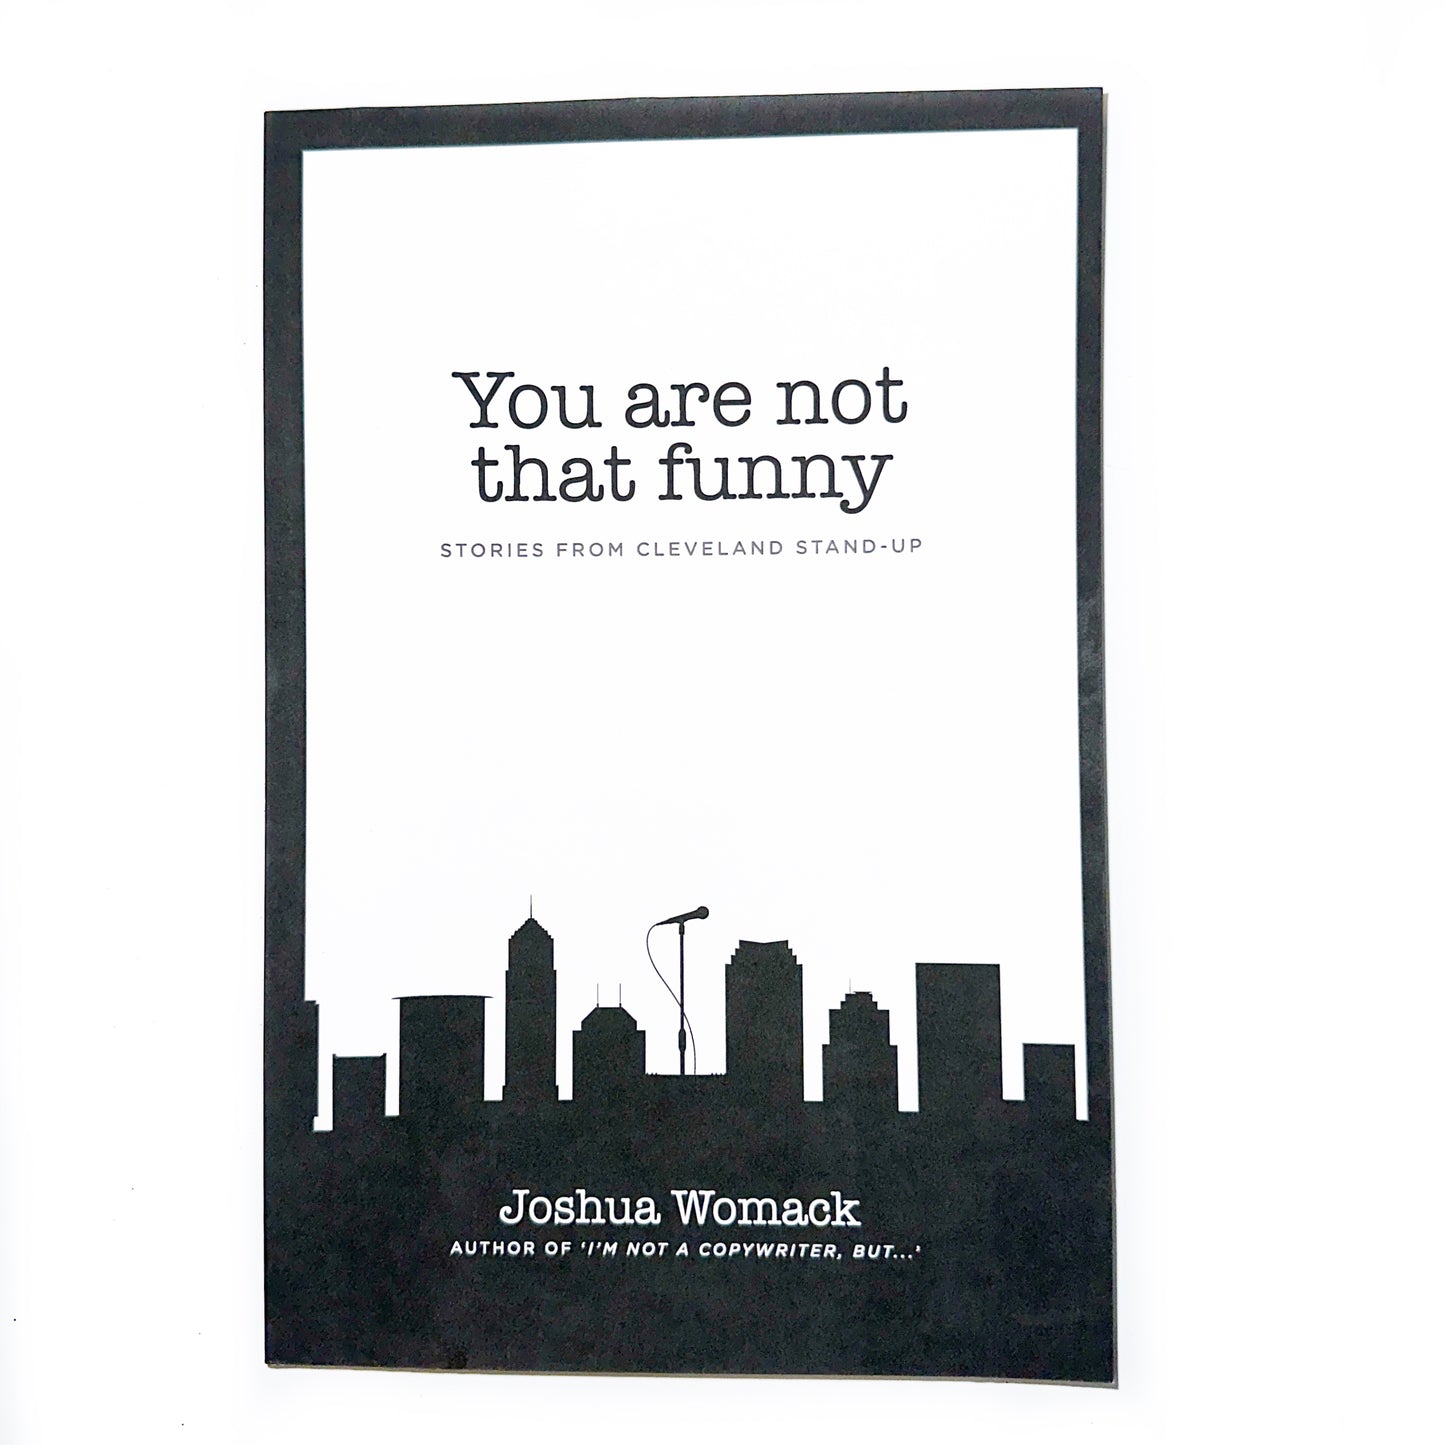 You are not that funny - Stories from Cleveland Stand-Up Book by Joshua Womack